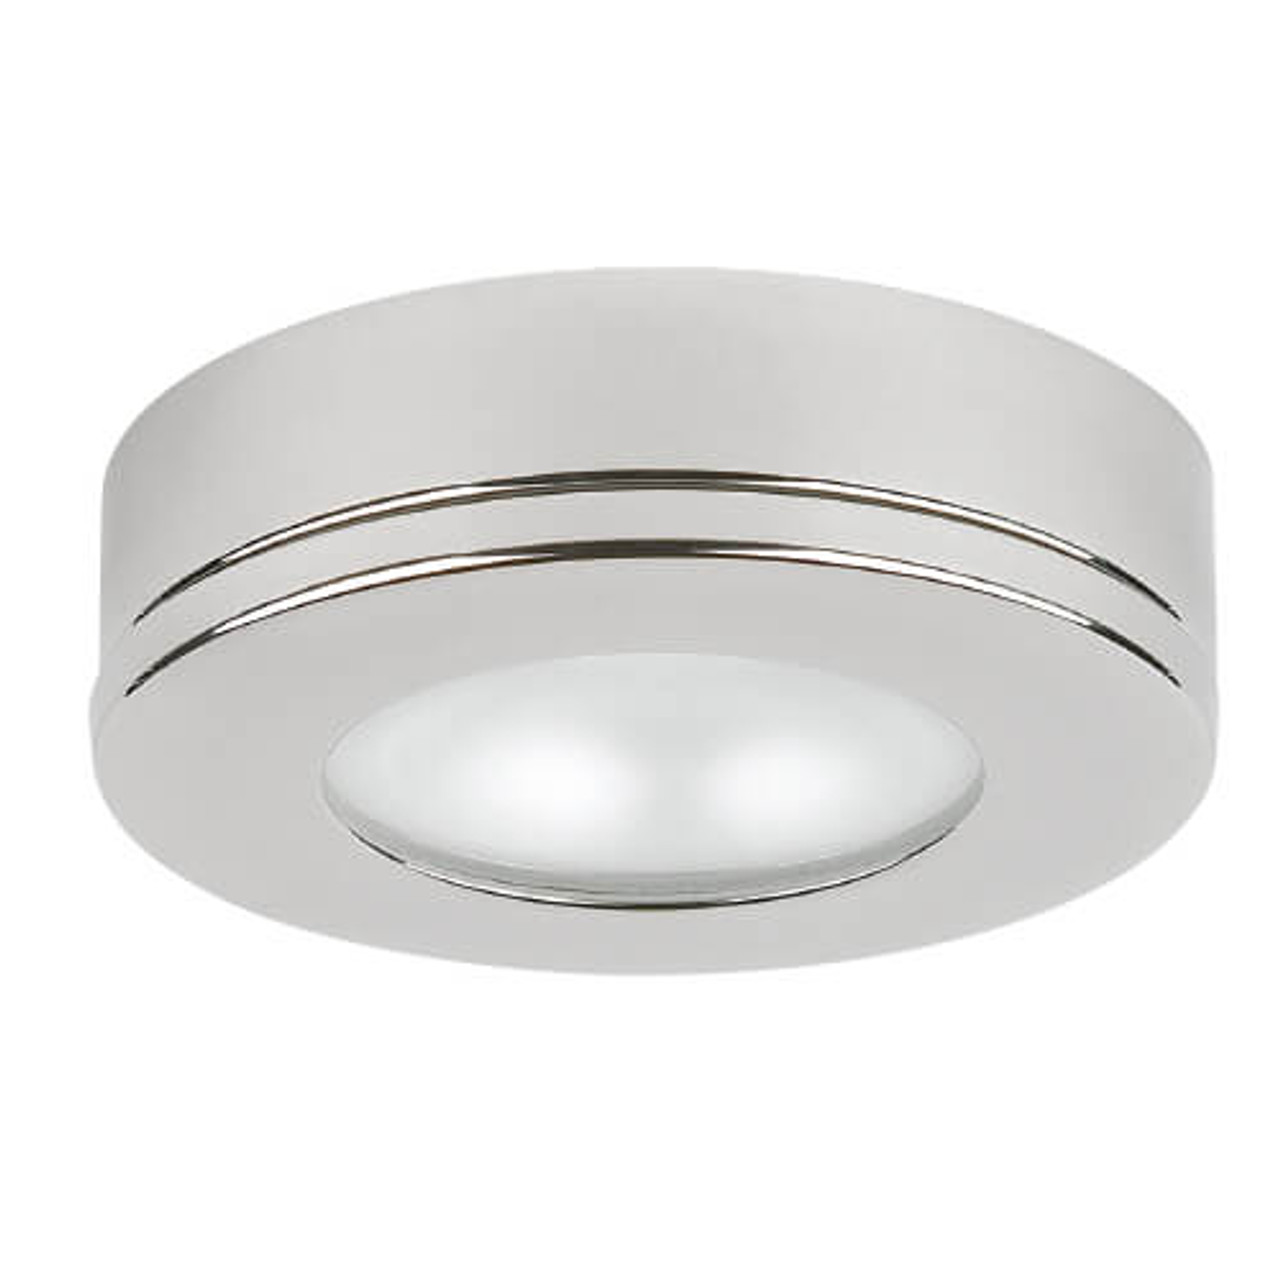 Imtra - Tide PowerLED Downlight - 10-40VDC, Polished Stainless Steel, Cool White, 3.2W, IP40 (ILIM57101) - Apollo Lighting